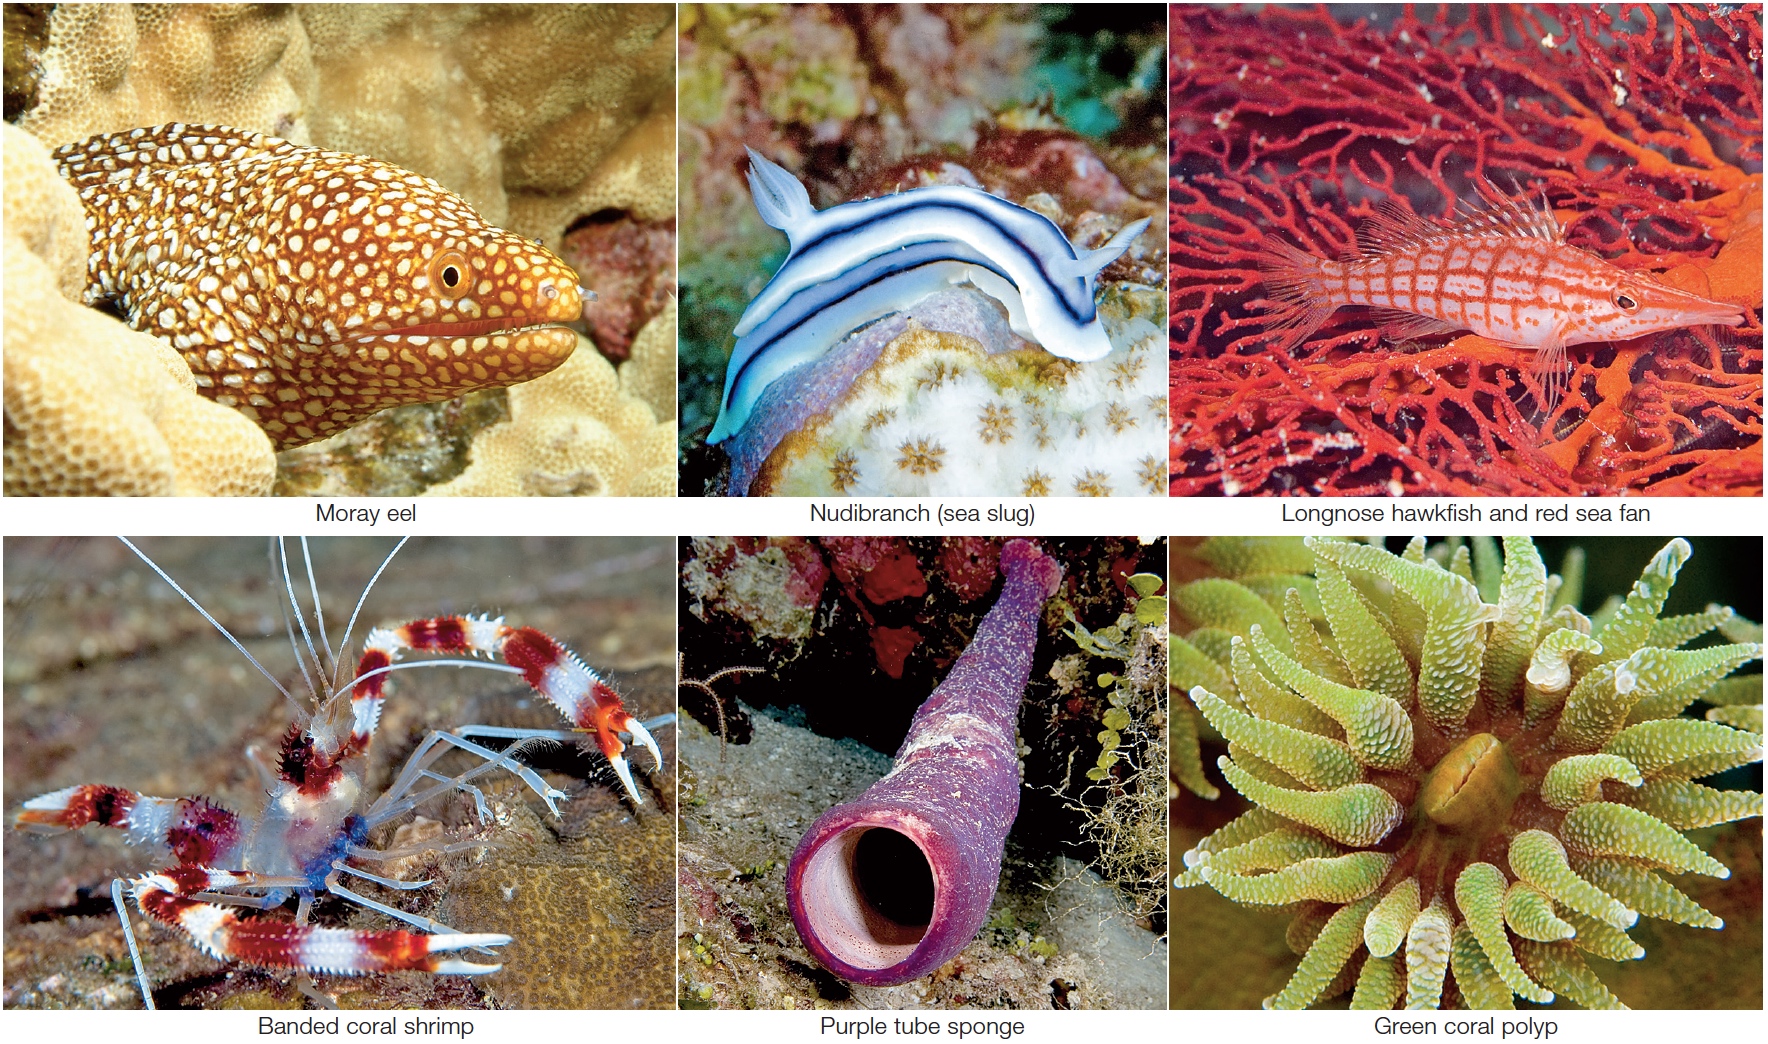 A sample of reef biodiversity